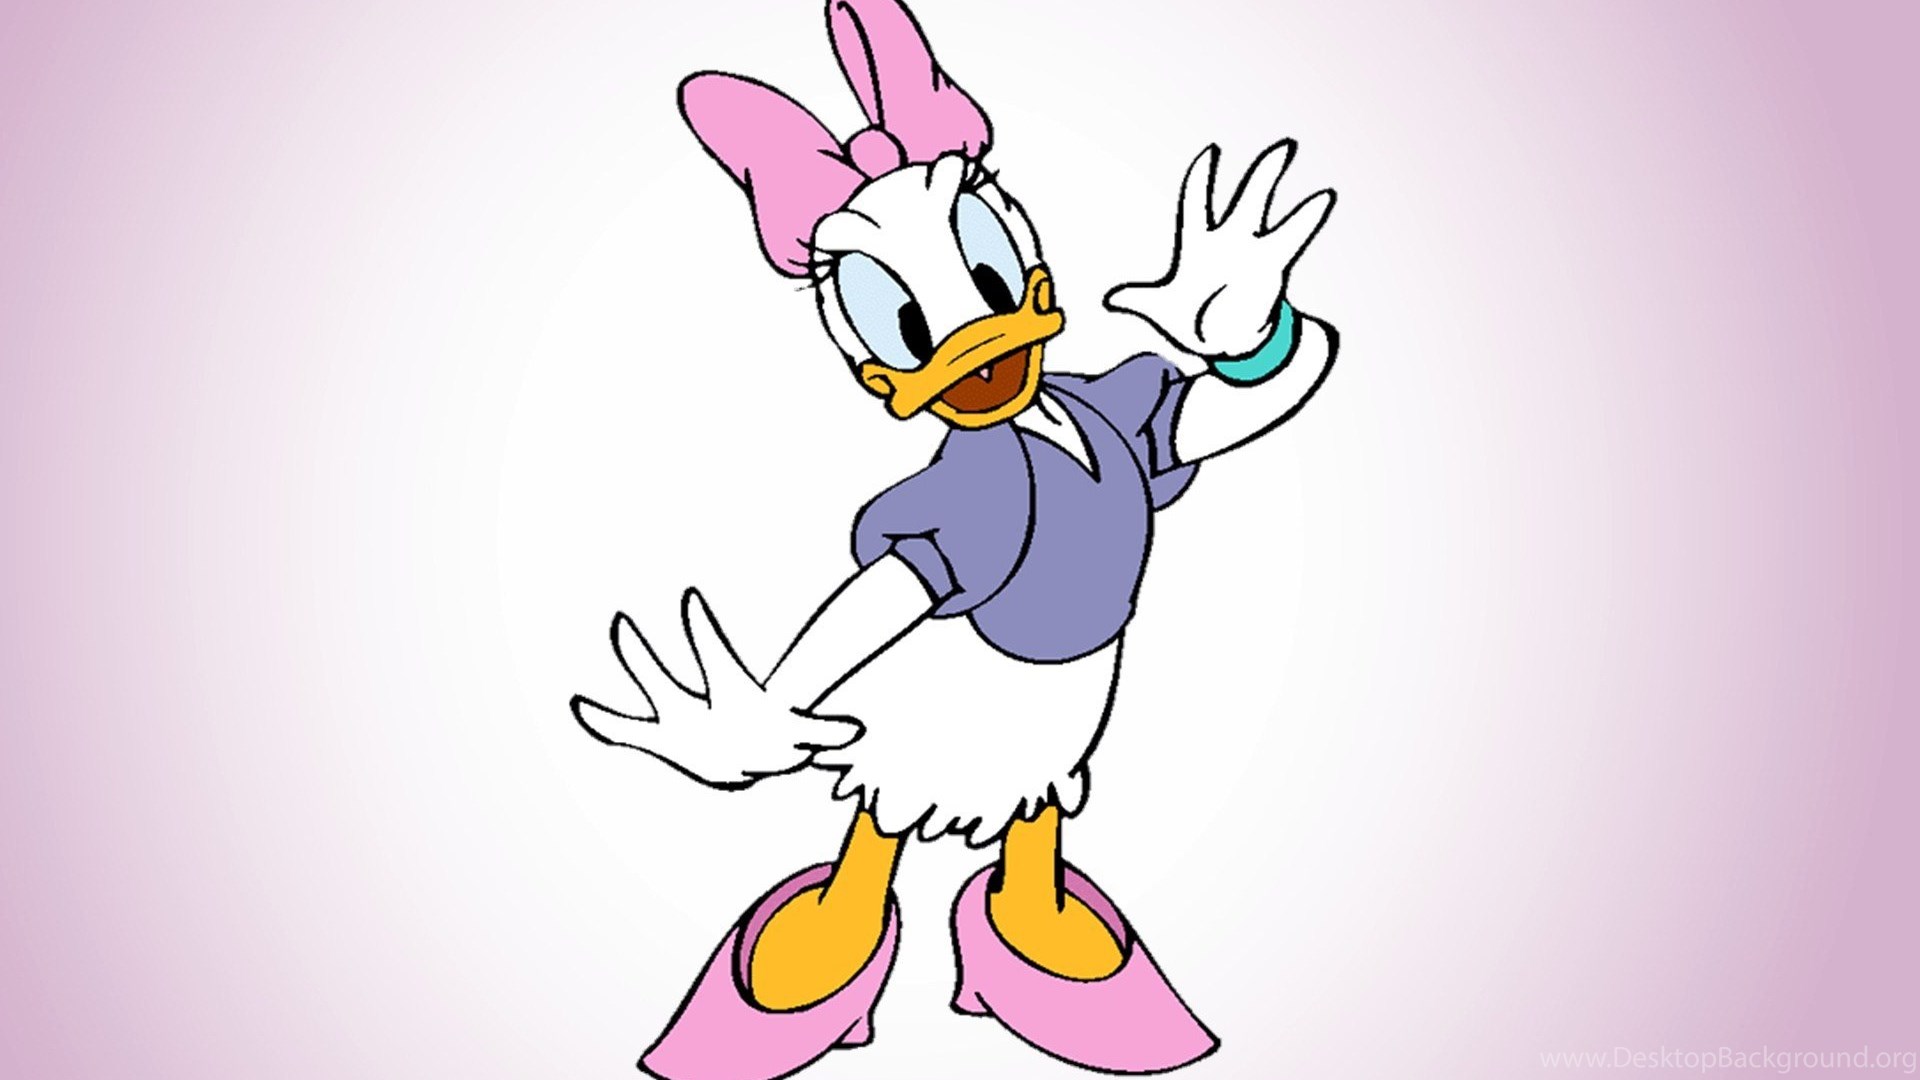 Daisy duck images